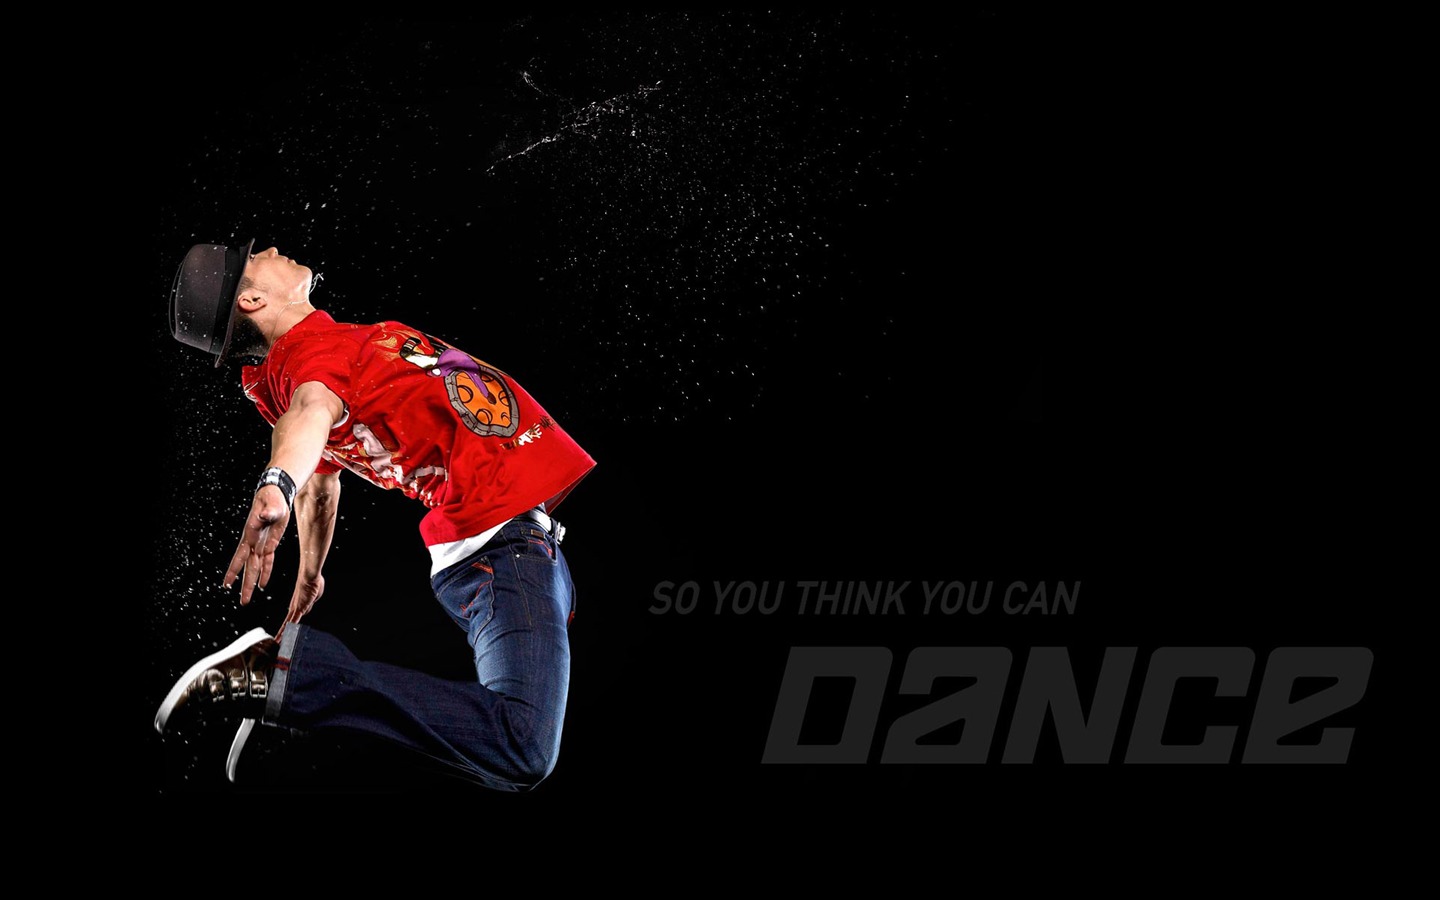 So You Think You Can Dance 舞林争霸 壁纸(一)6 - 1440x900